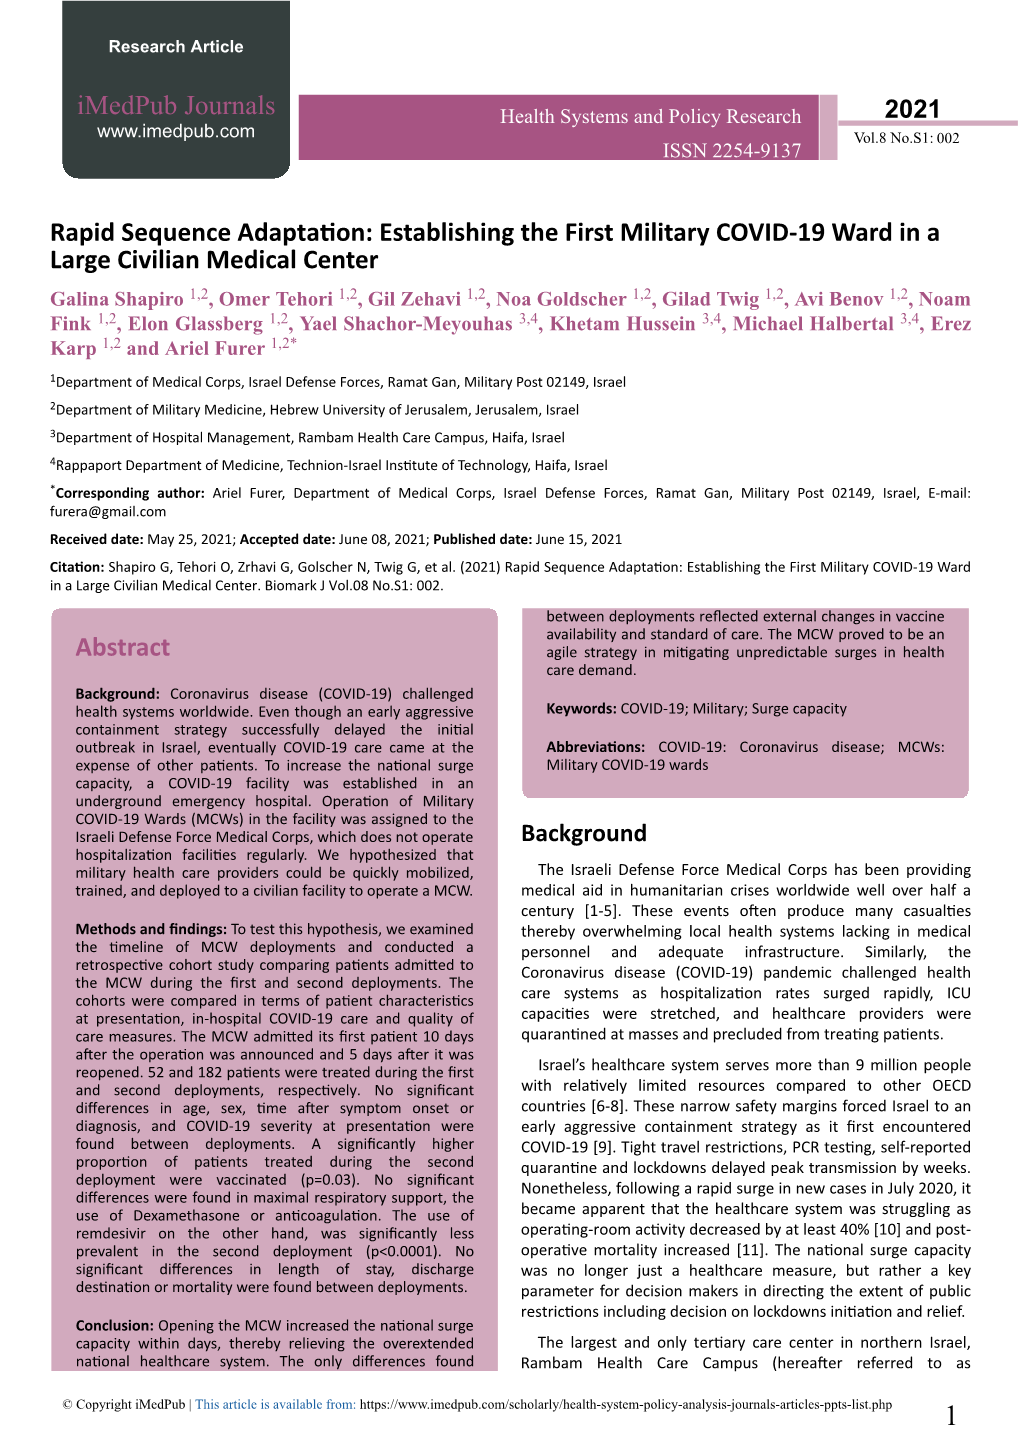 Rapid Sequence Adaptation: Establishing the First Military COVID-19 Ward in a Large Civilian Medical Center